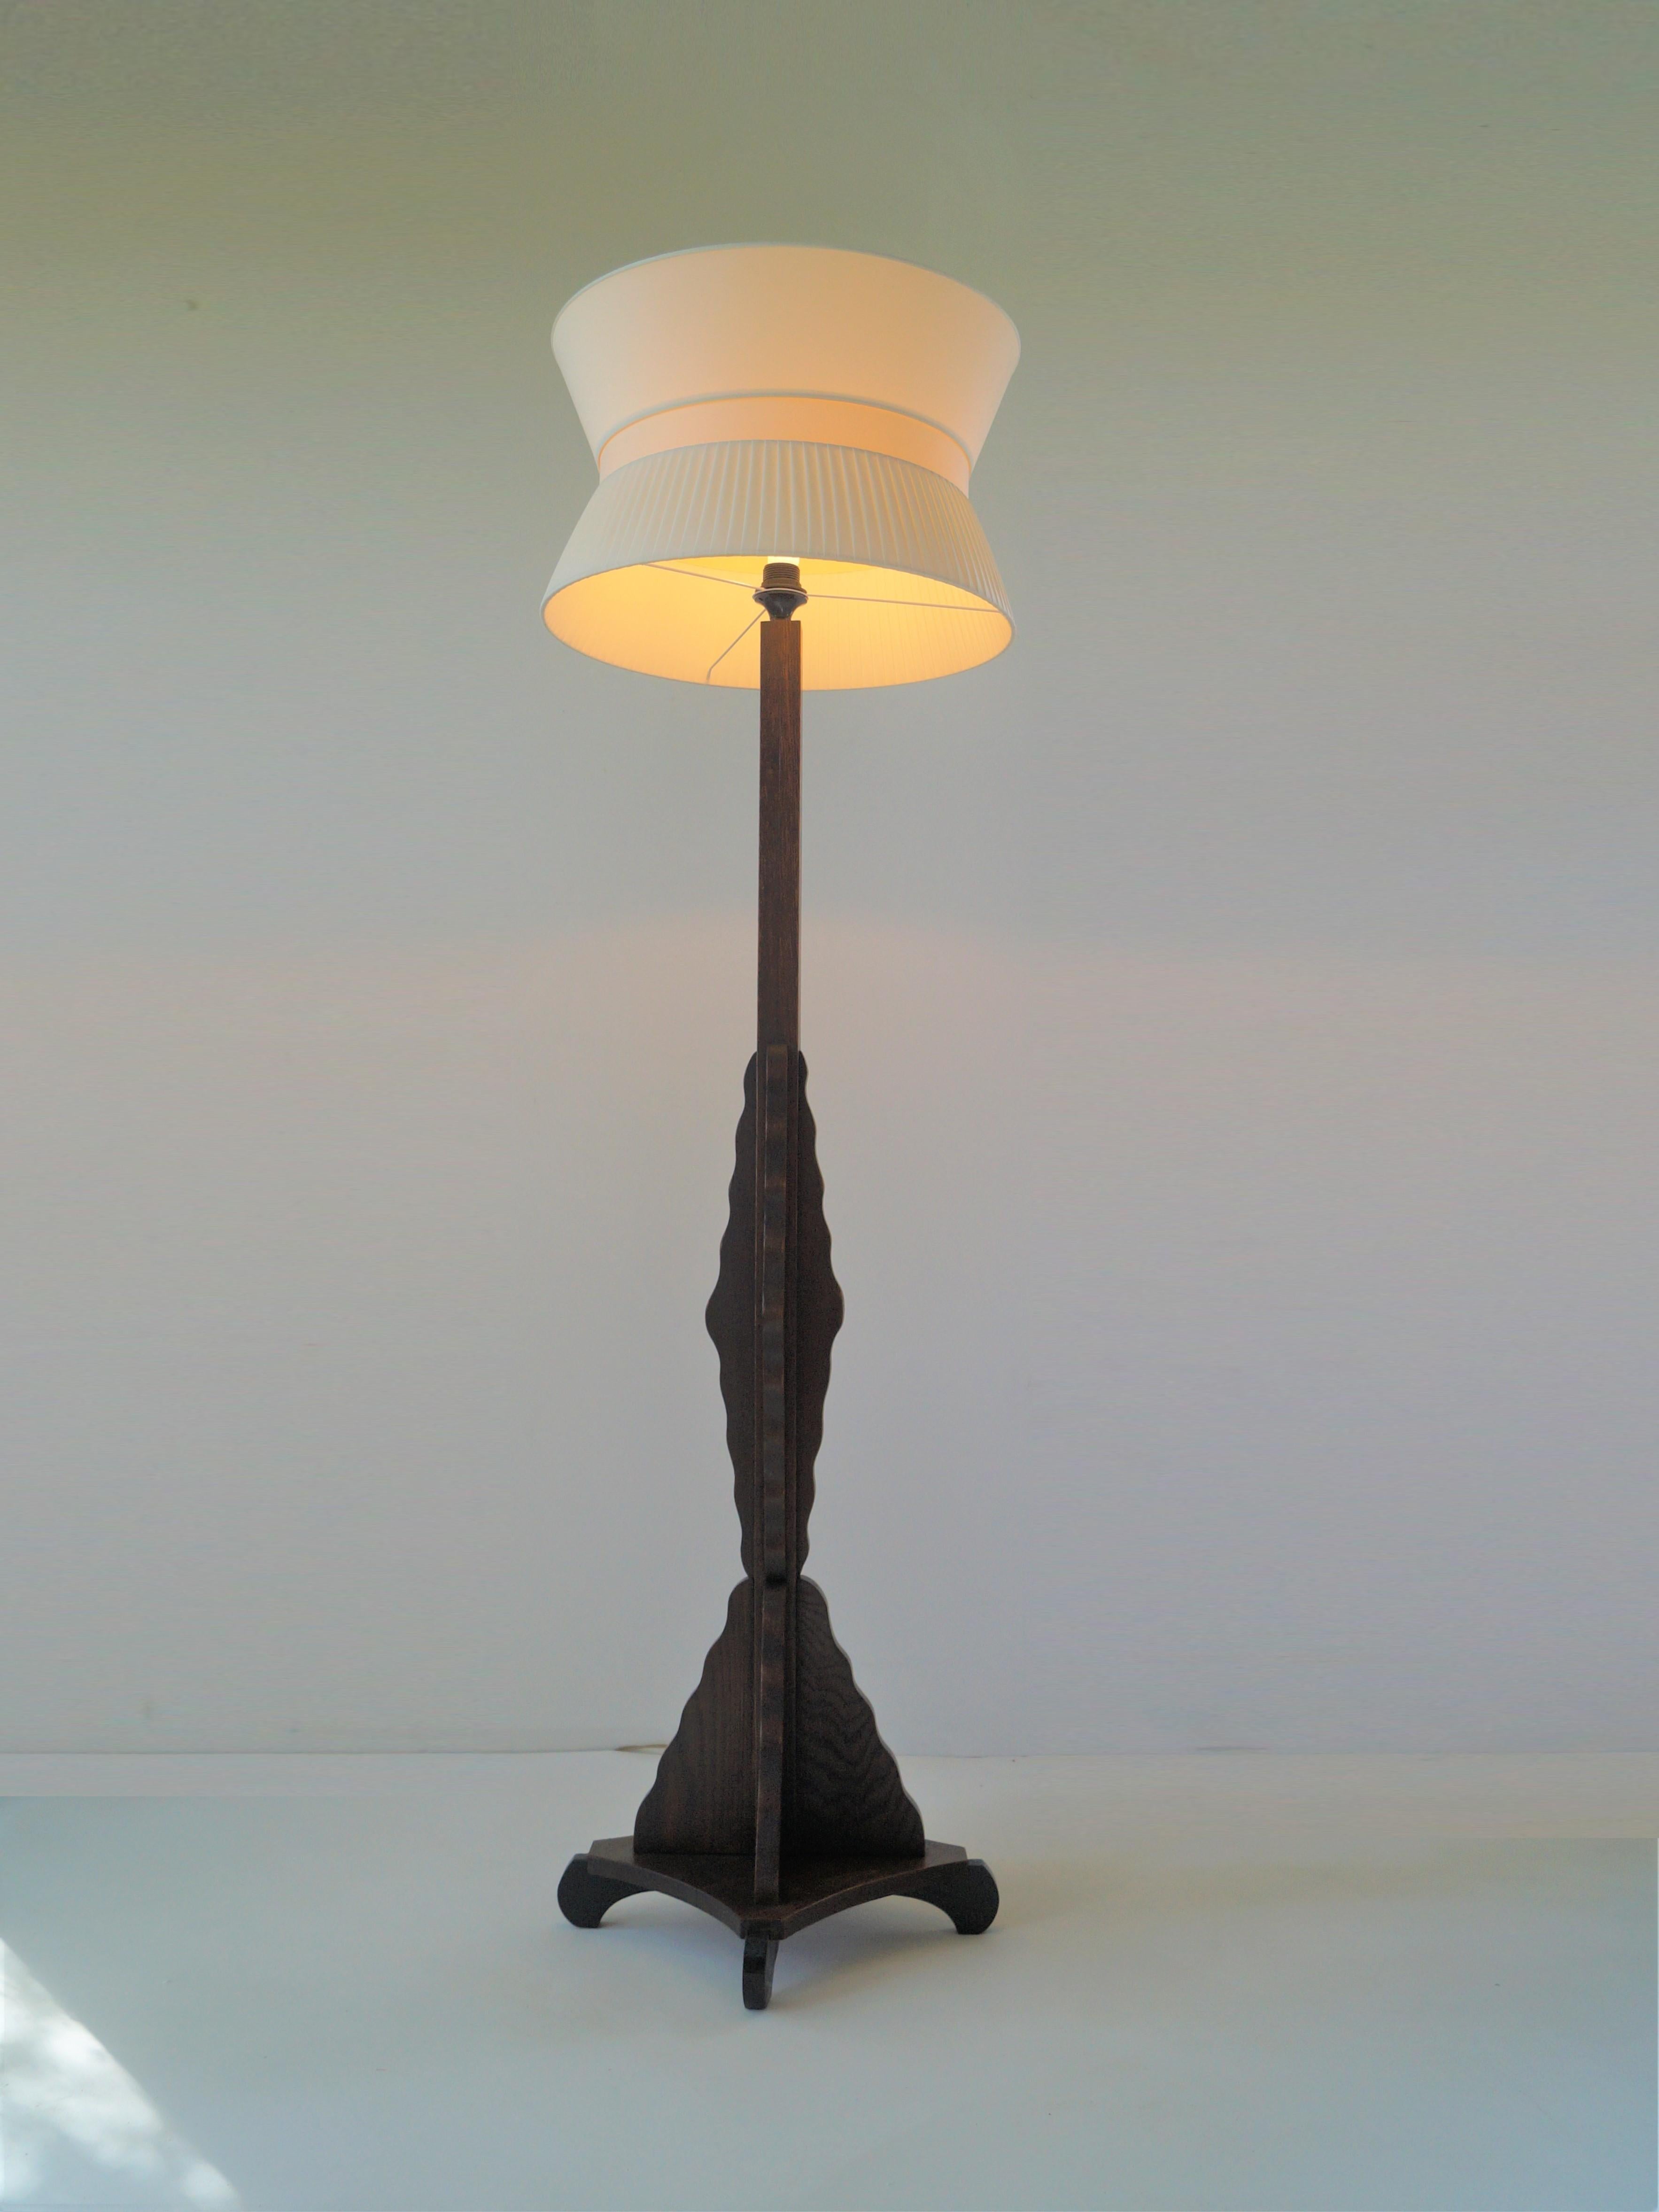 An elegant Dutch Art Deco 1920s floorlamp, Amsterdamse School (Amsterdam School). Made from solid woodcarved oak this piece has an organic, sculptural  design and blackened leg ends on the four tapered sides. 
This piece combines very well with